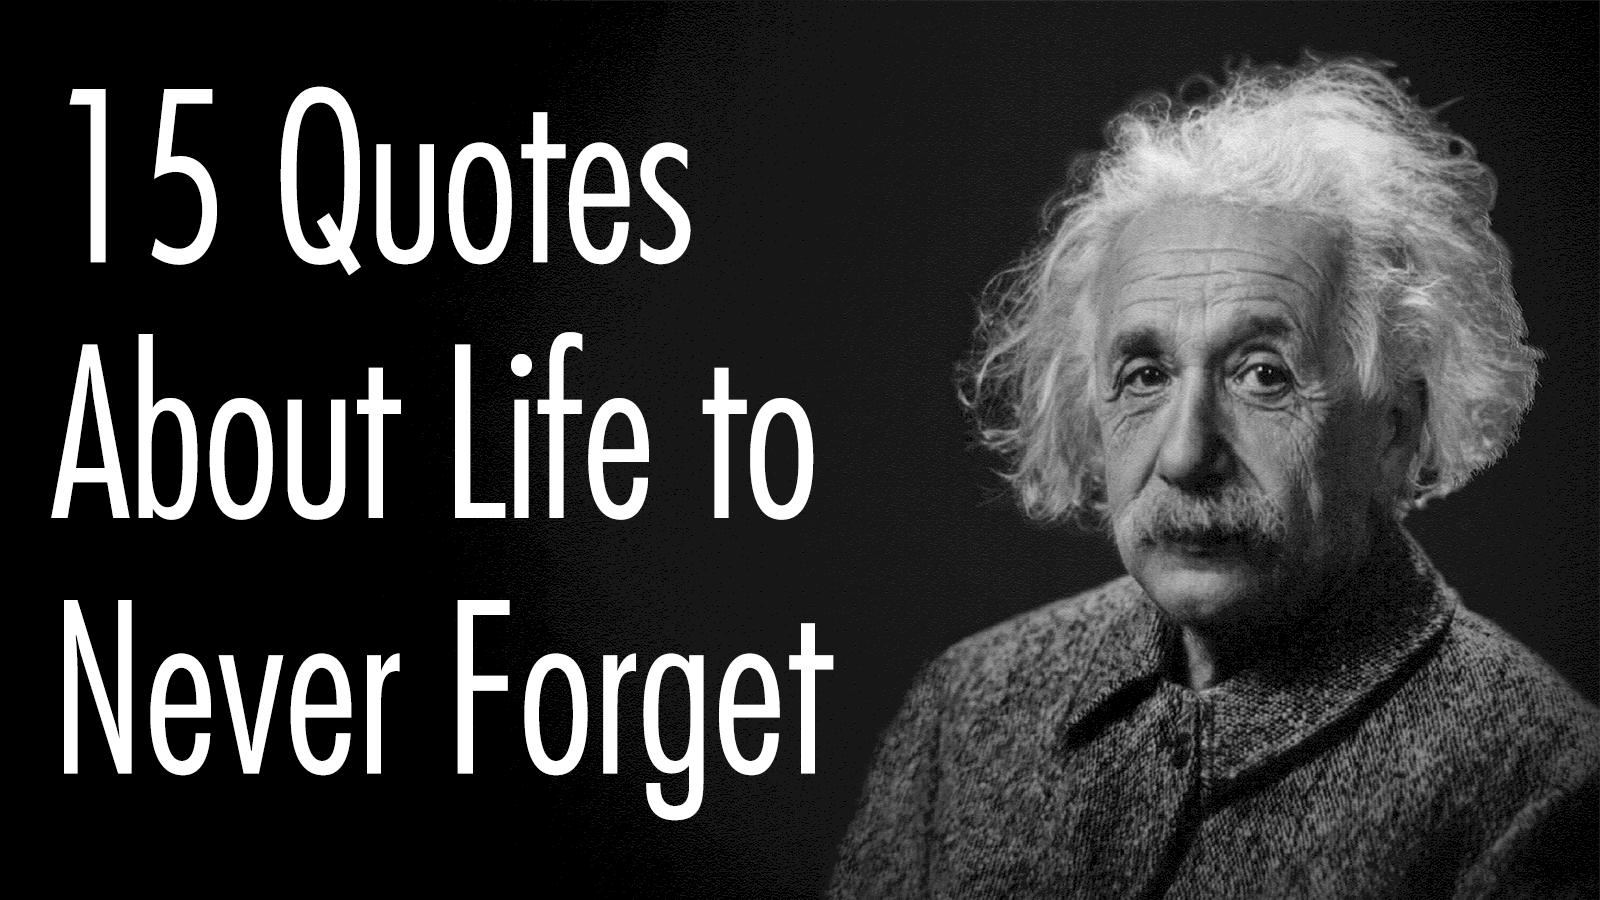 15 Quotes About Life to Never Forget